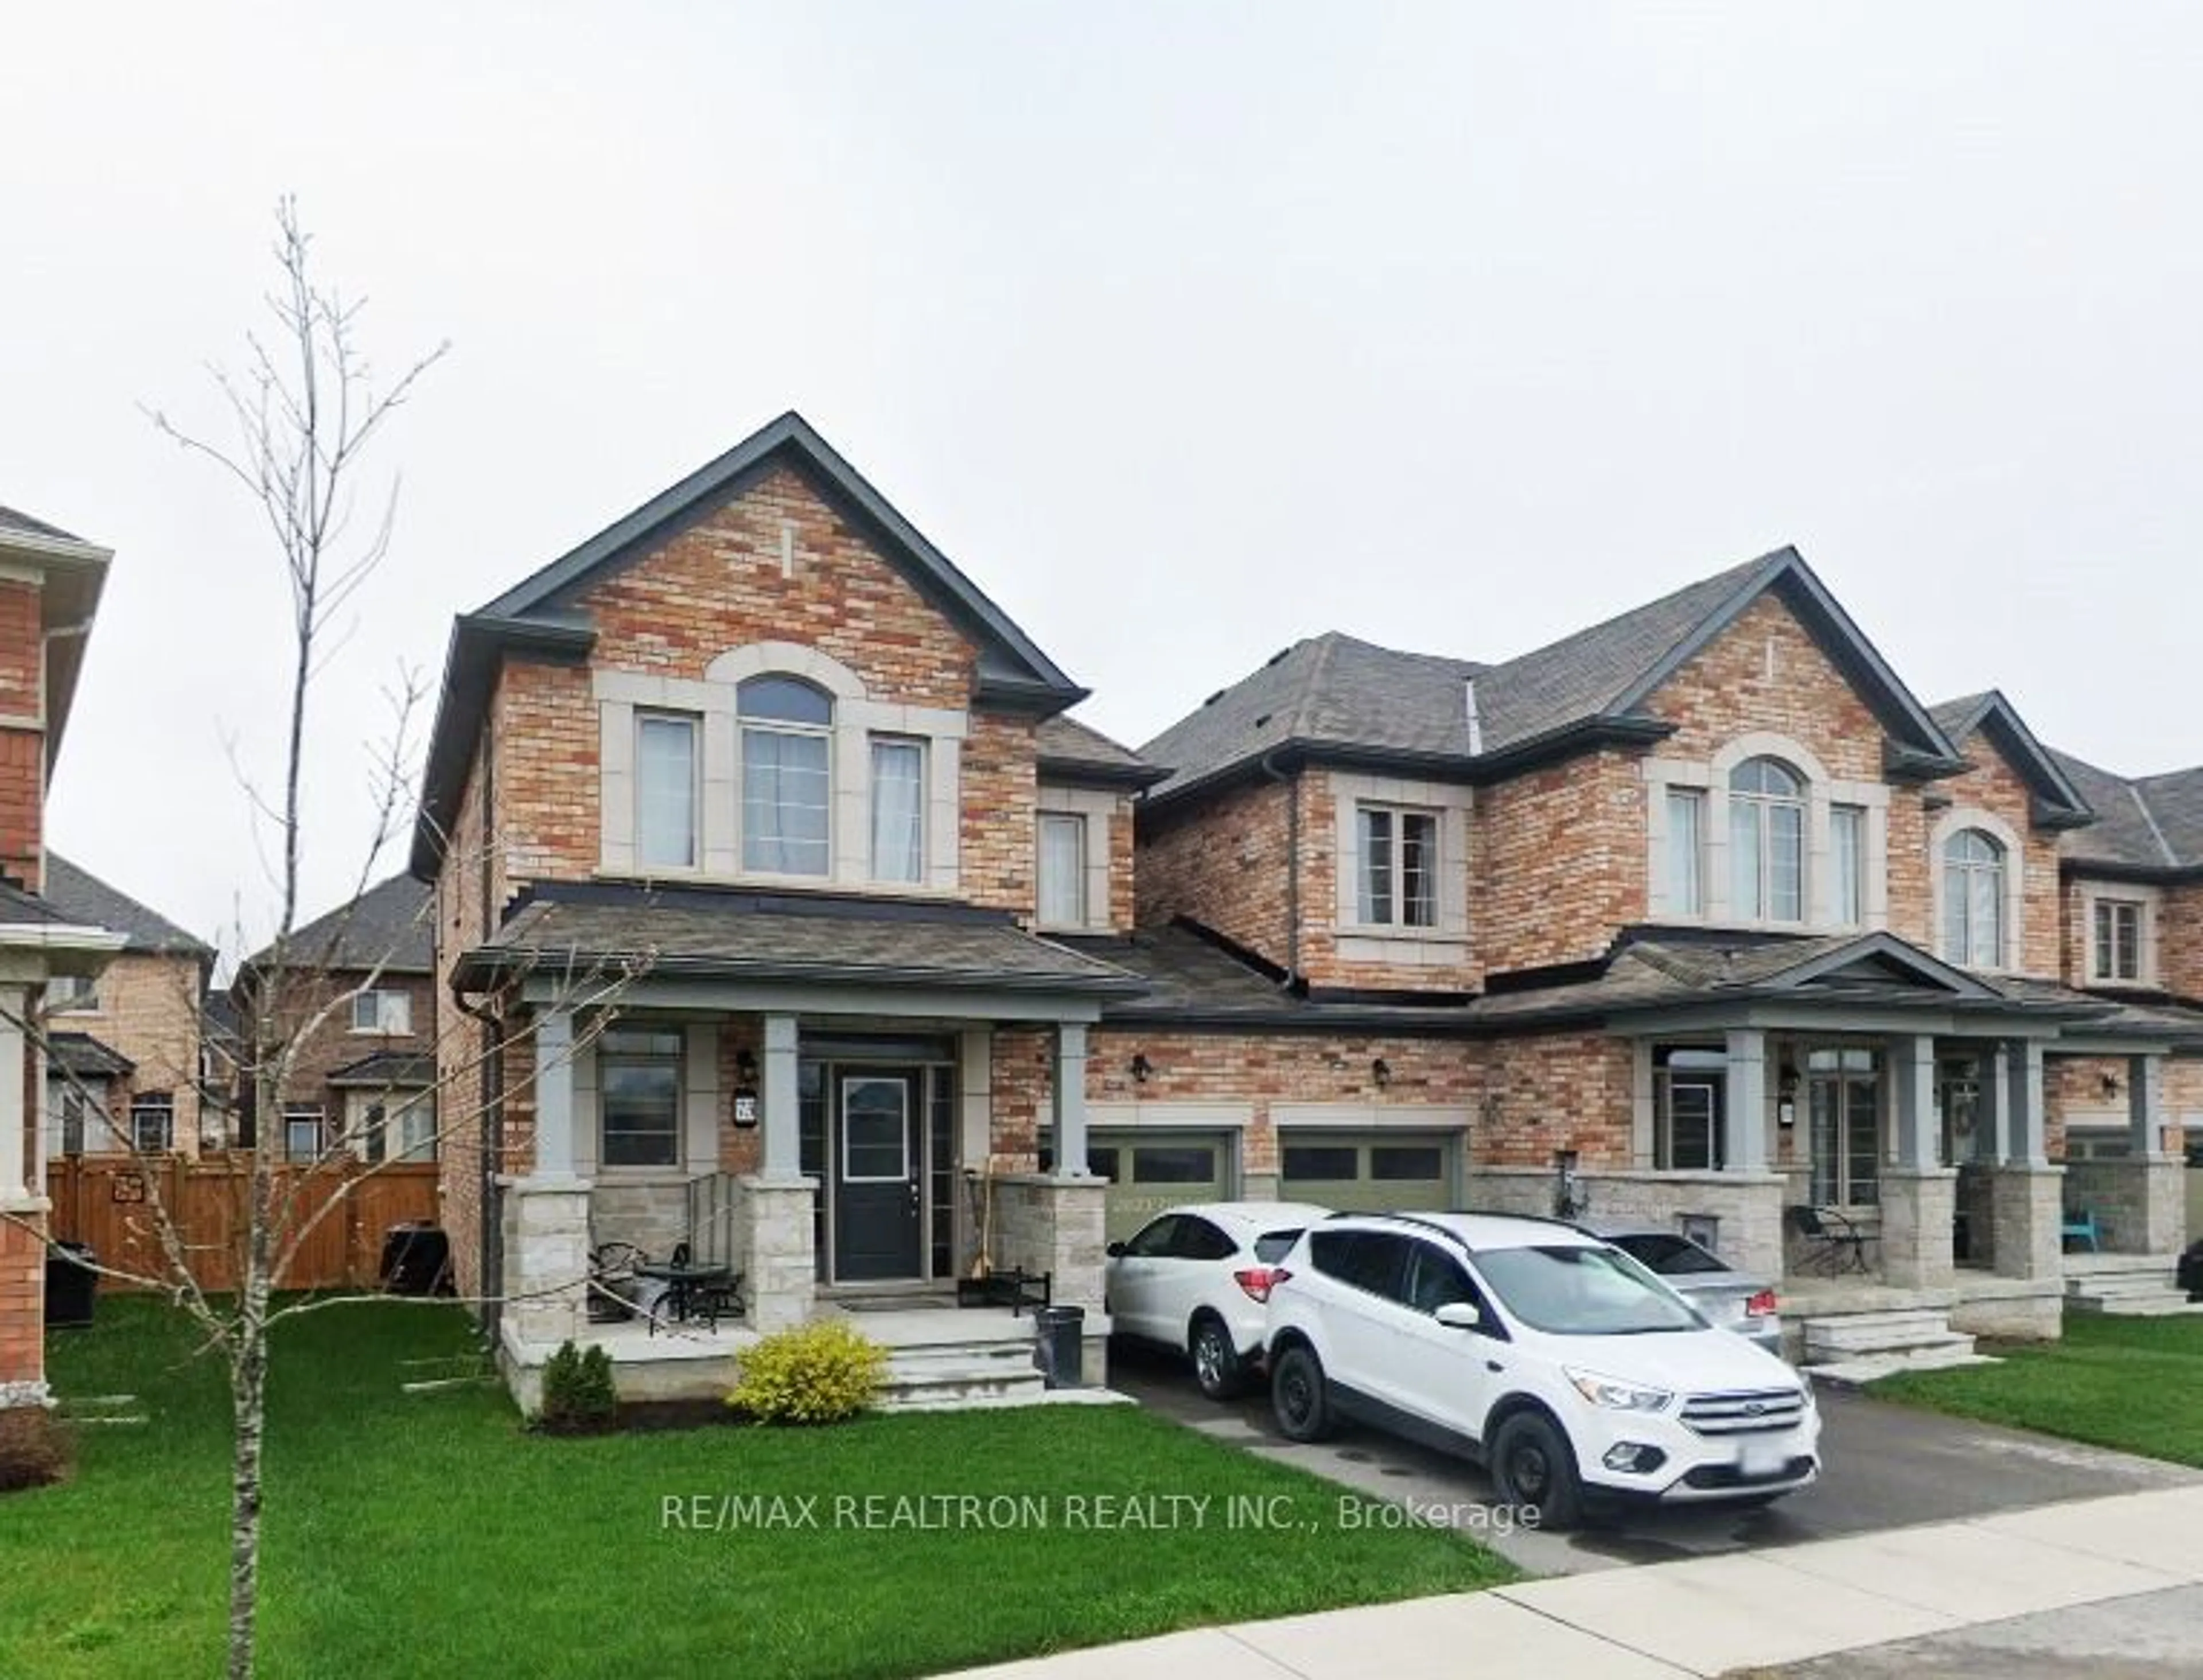 Home with brick exterior material for 73 Jim Mortson Dr, East Gwillimbury Ontario L9N 0R8